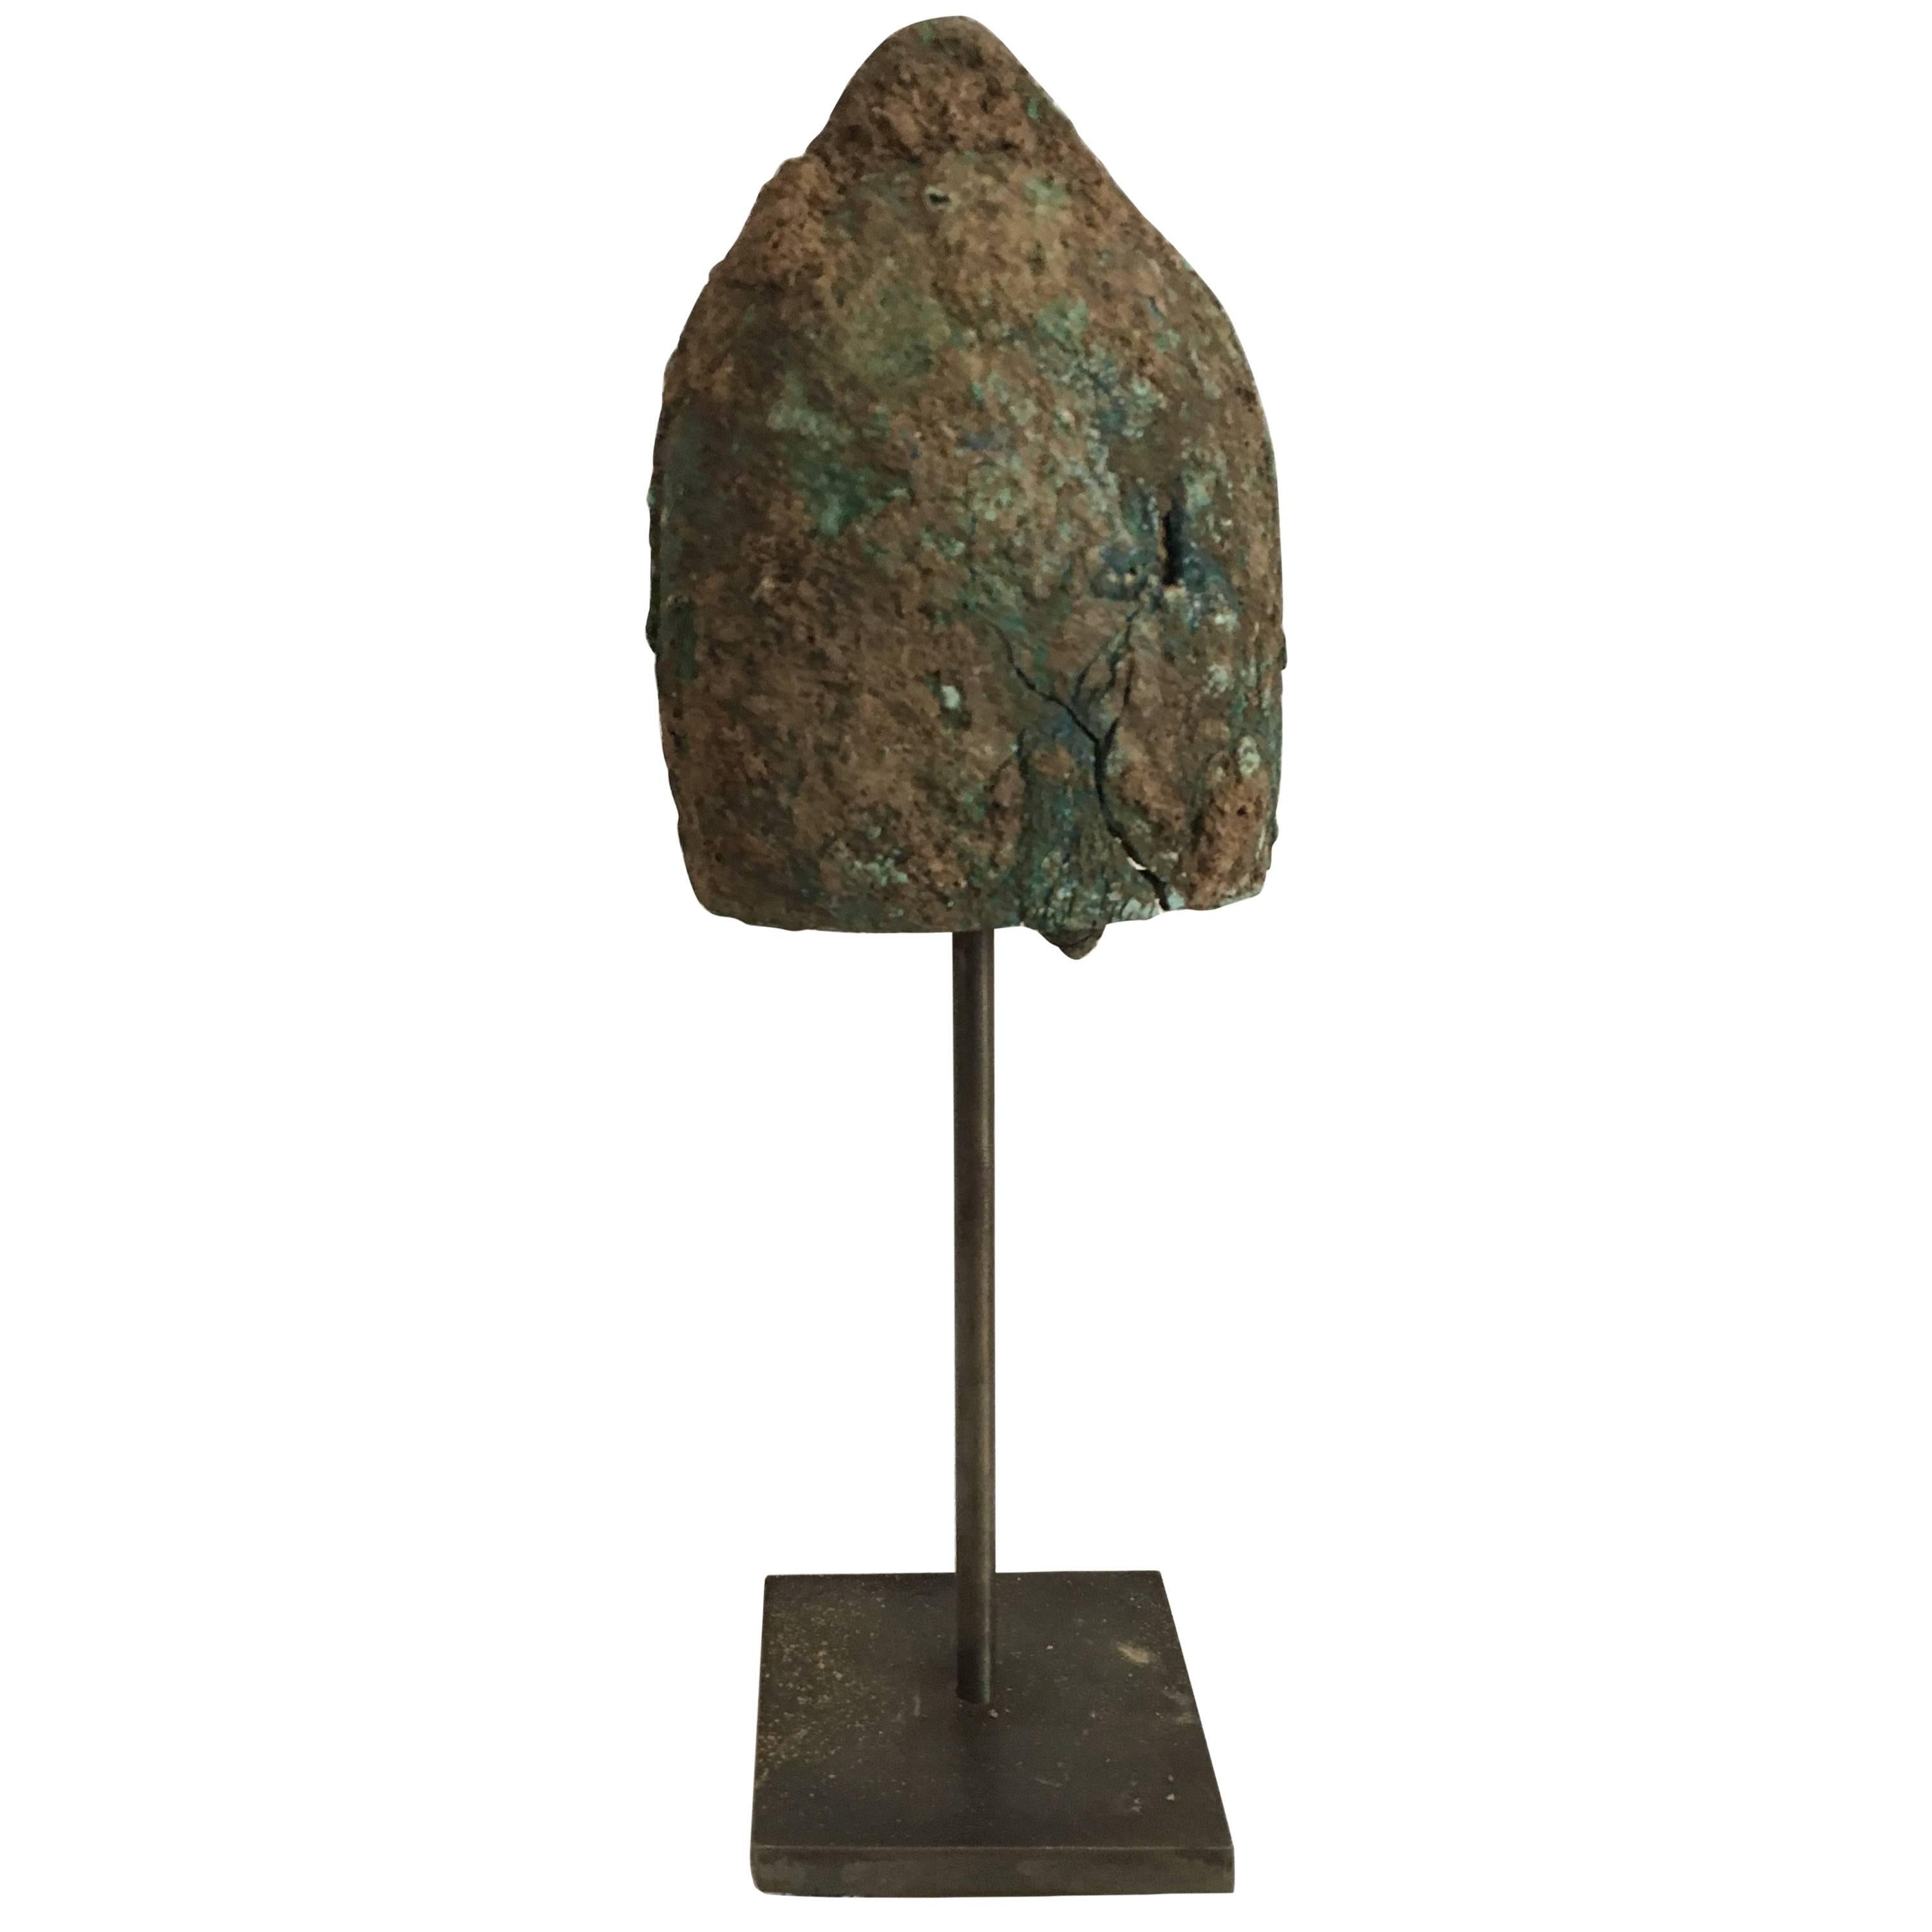 18th Century or Earlier Bell Excavated from the Central Highlands Vietnam